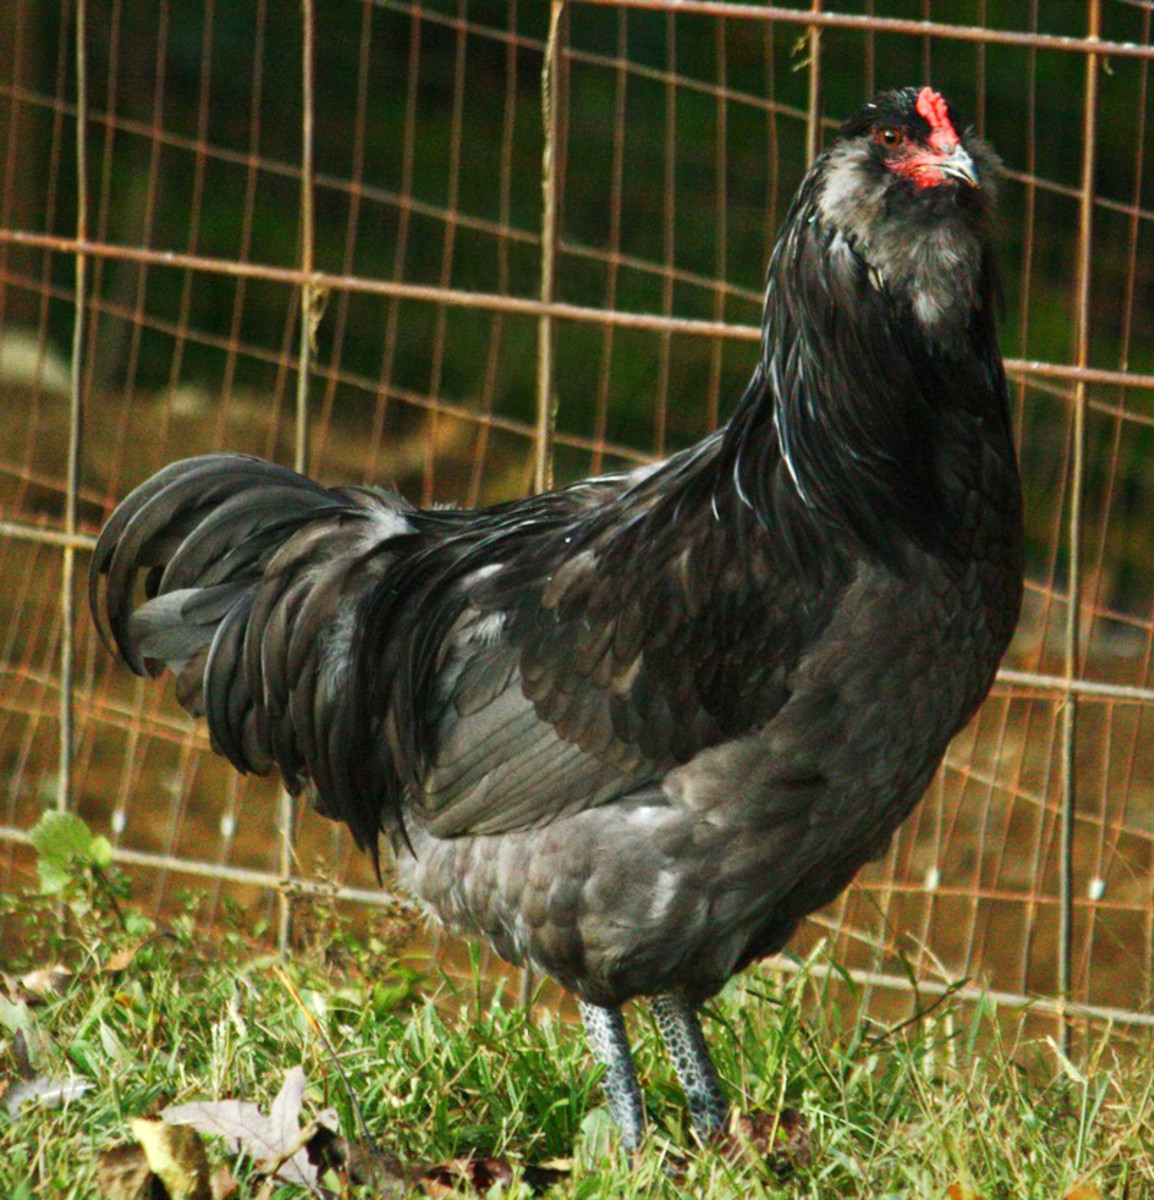 Blue Ameraucana cock, from Cree Farms. A little under 1 year old.